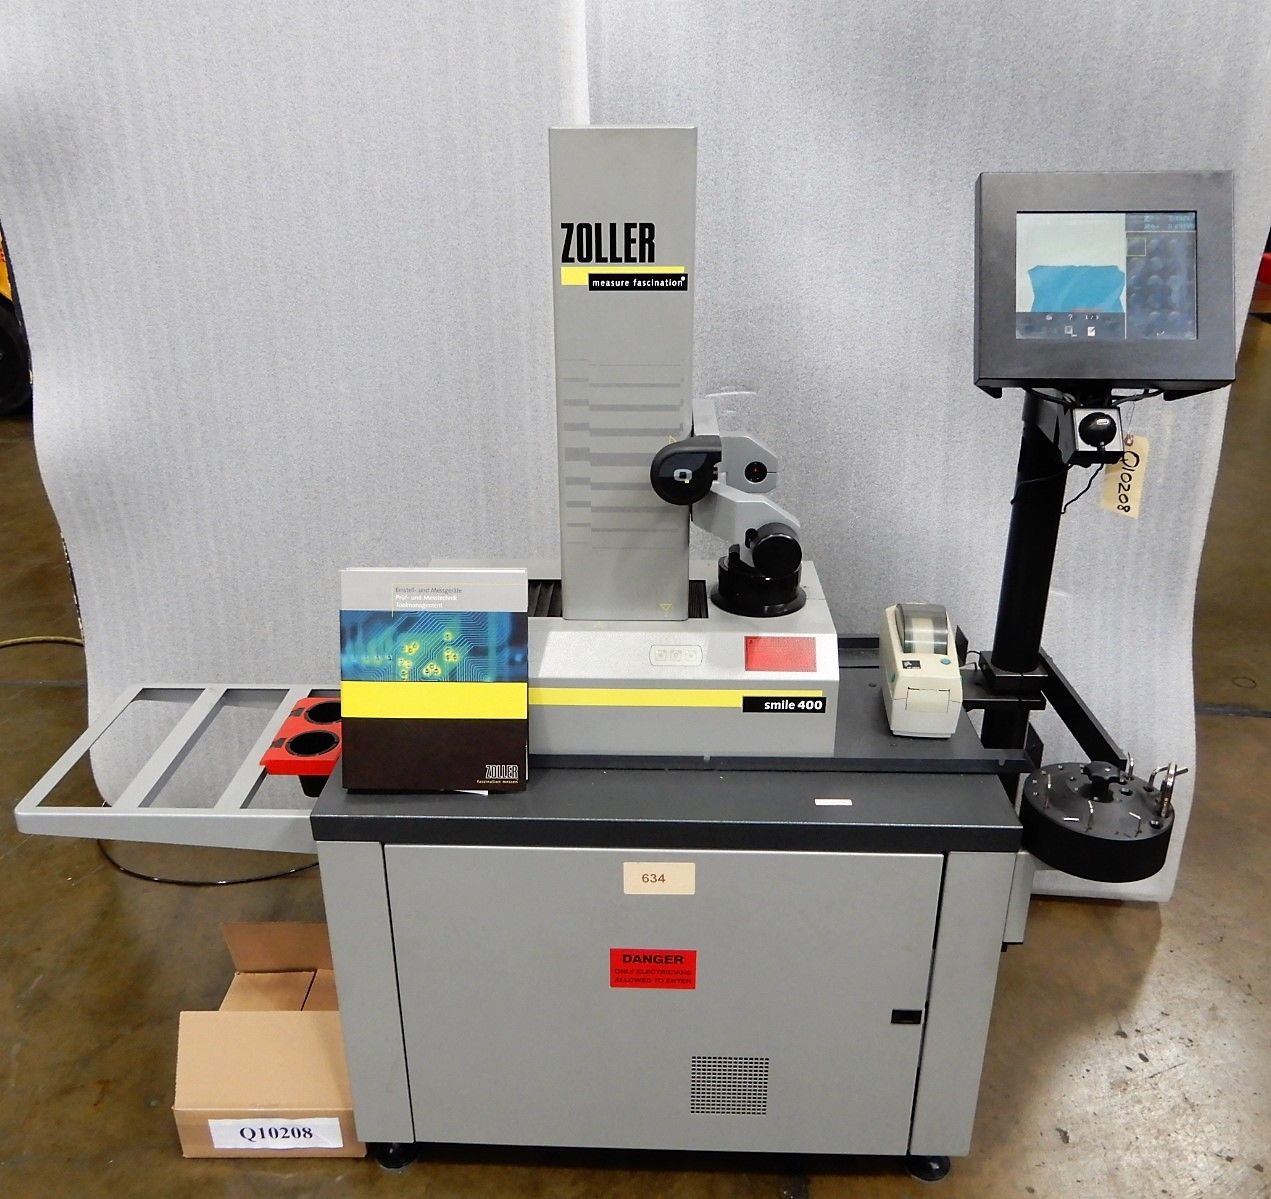 Zoller Smile 400 Tool Presetter For Sale, Zoller Touch Screen Control, Z-axis = 15.7” For Sale